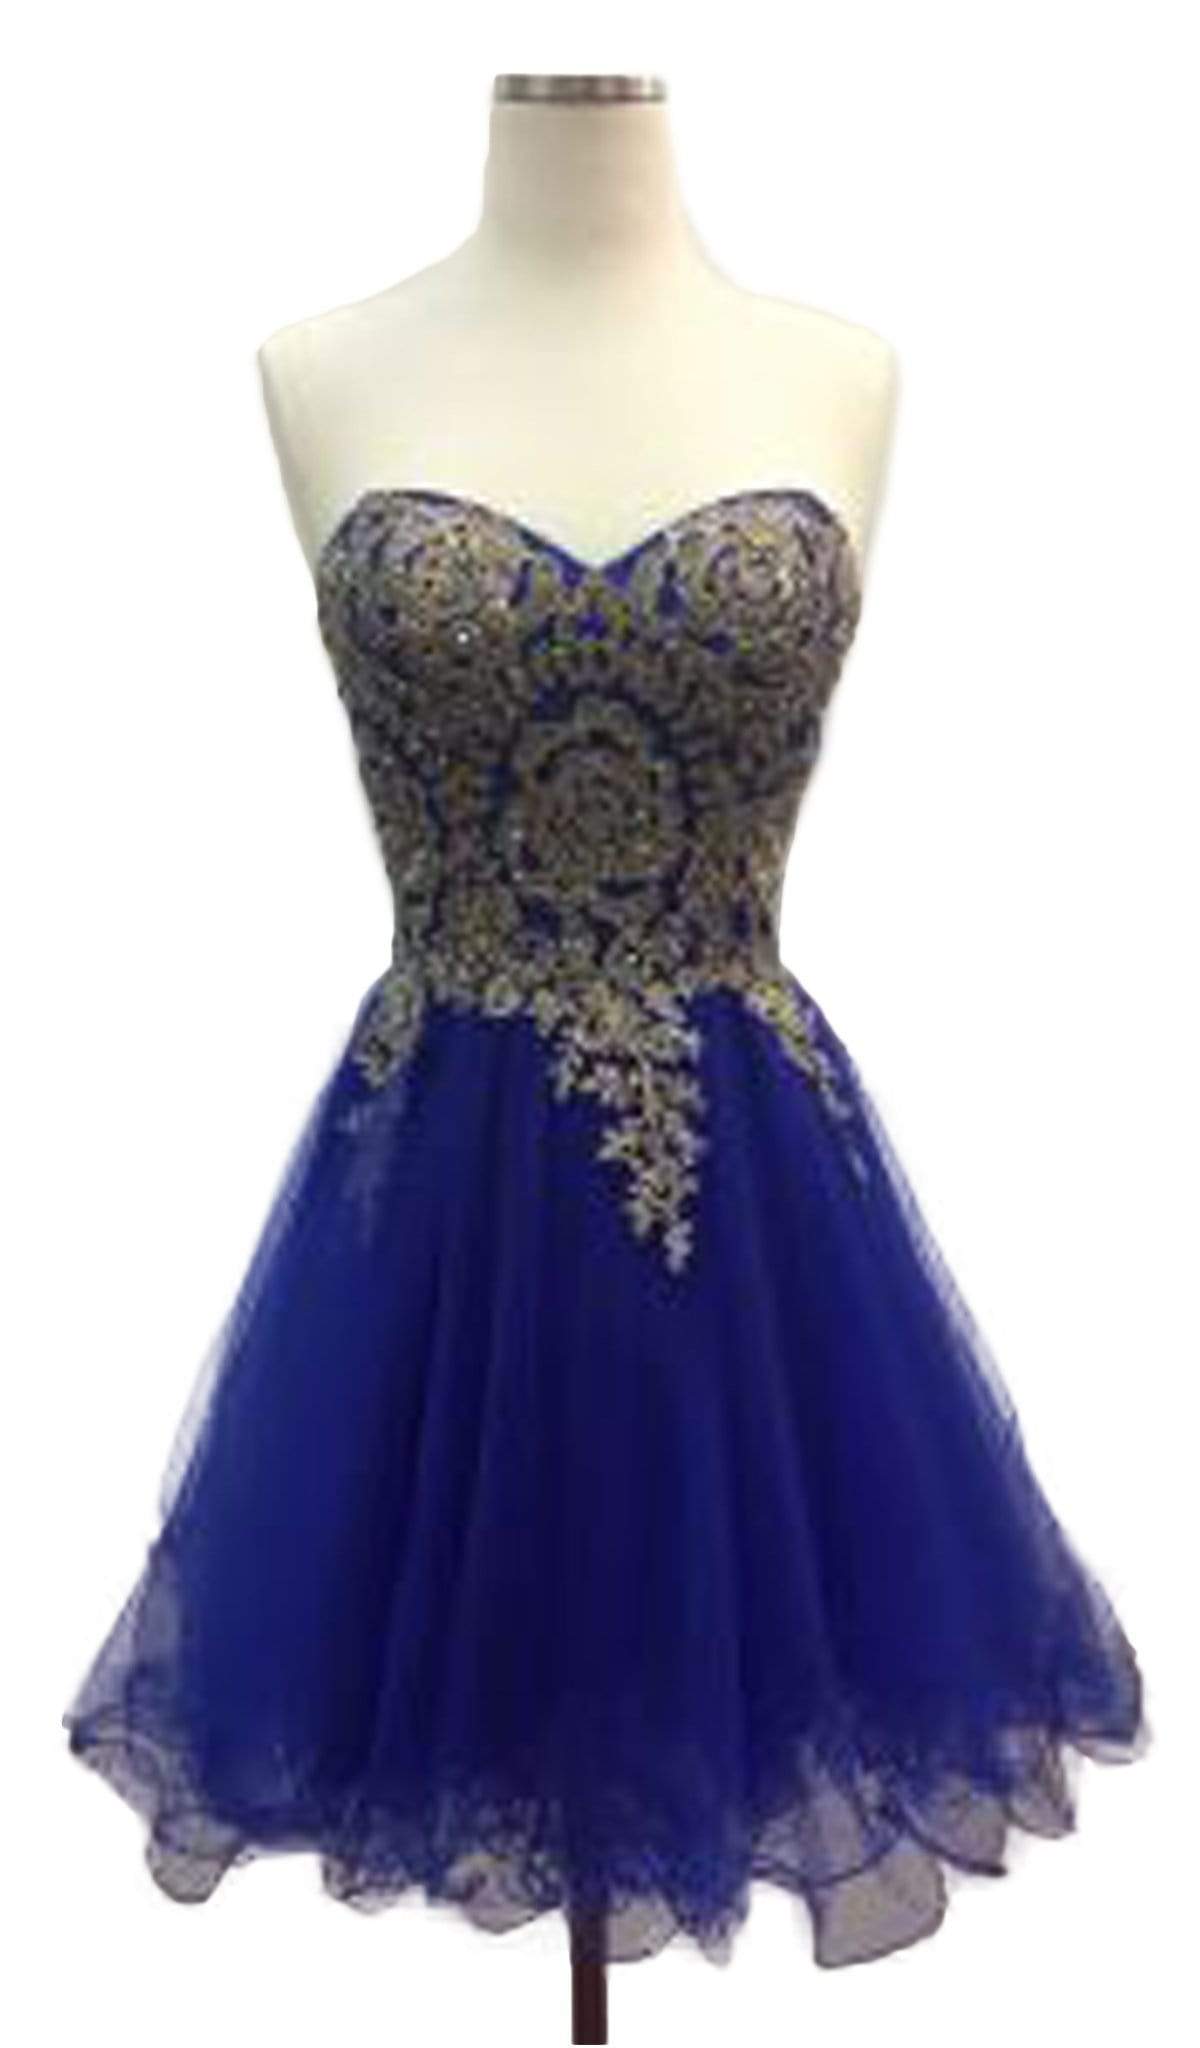 Aspeed Design - Strapless Embroidered A-line Homecoming Dress
